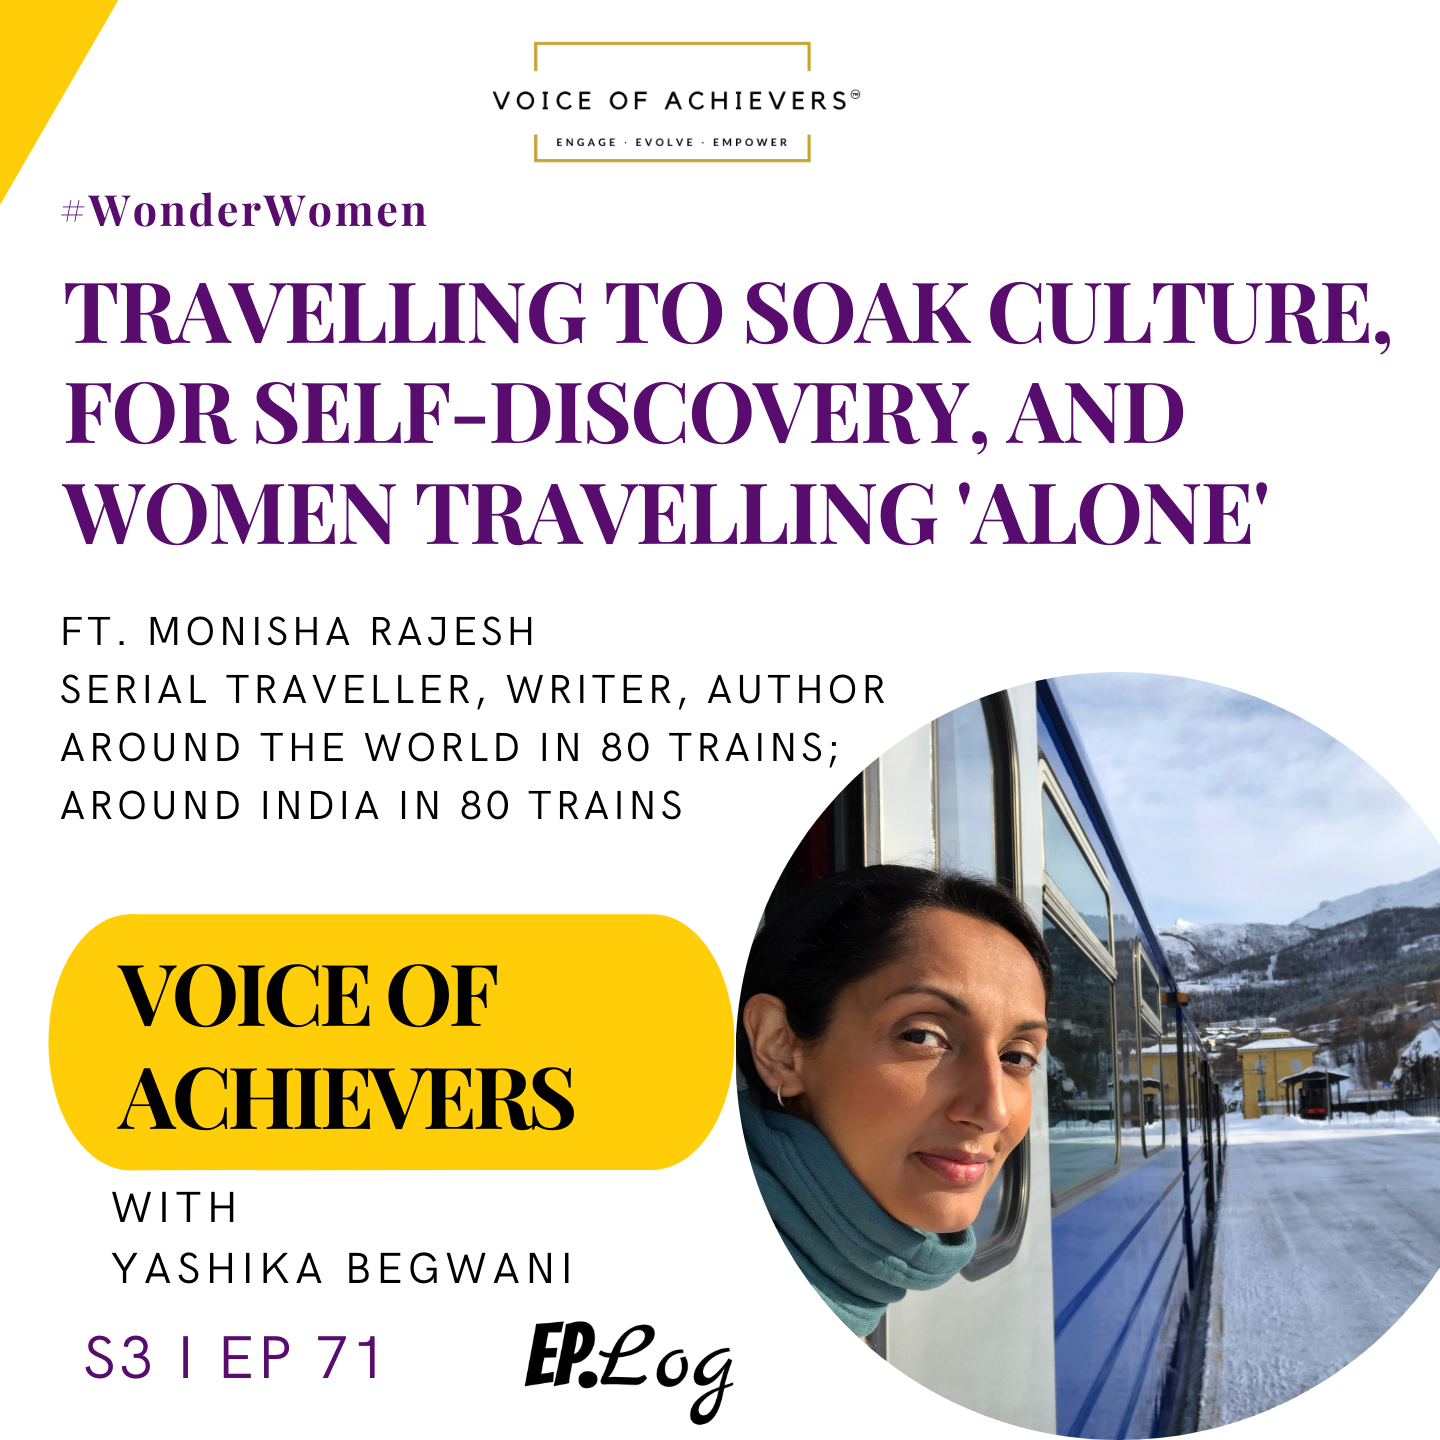 Travelling to soak culture, for self-discovery, and Women travelling 'alone' Ft Monisha Rajesh